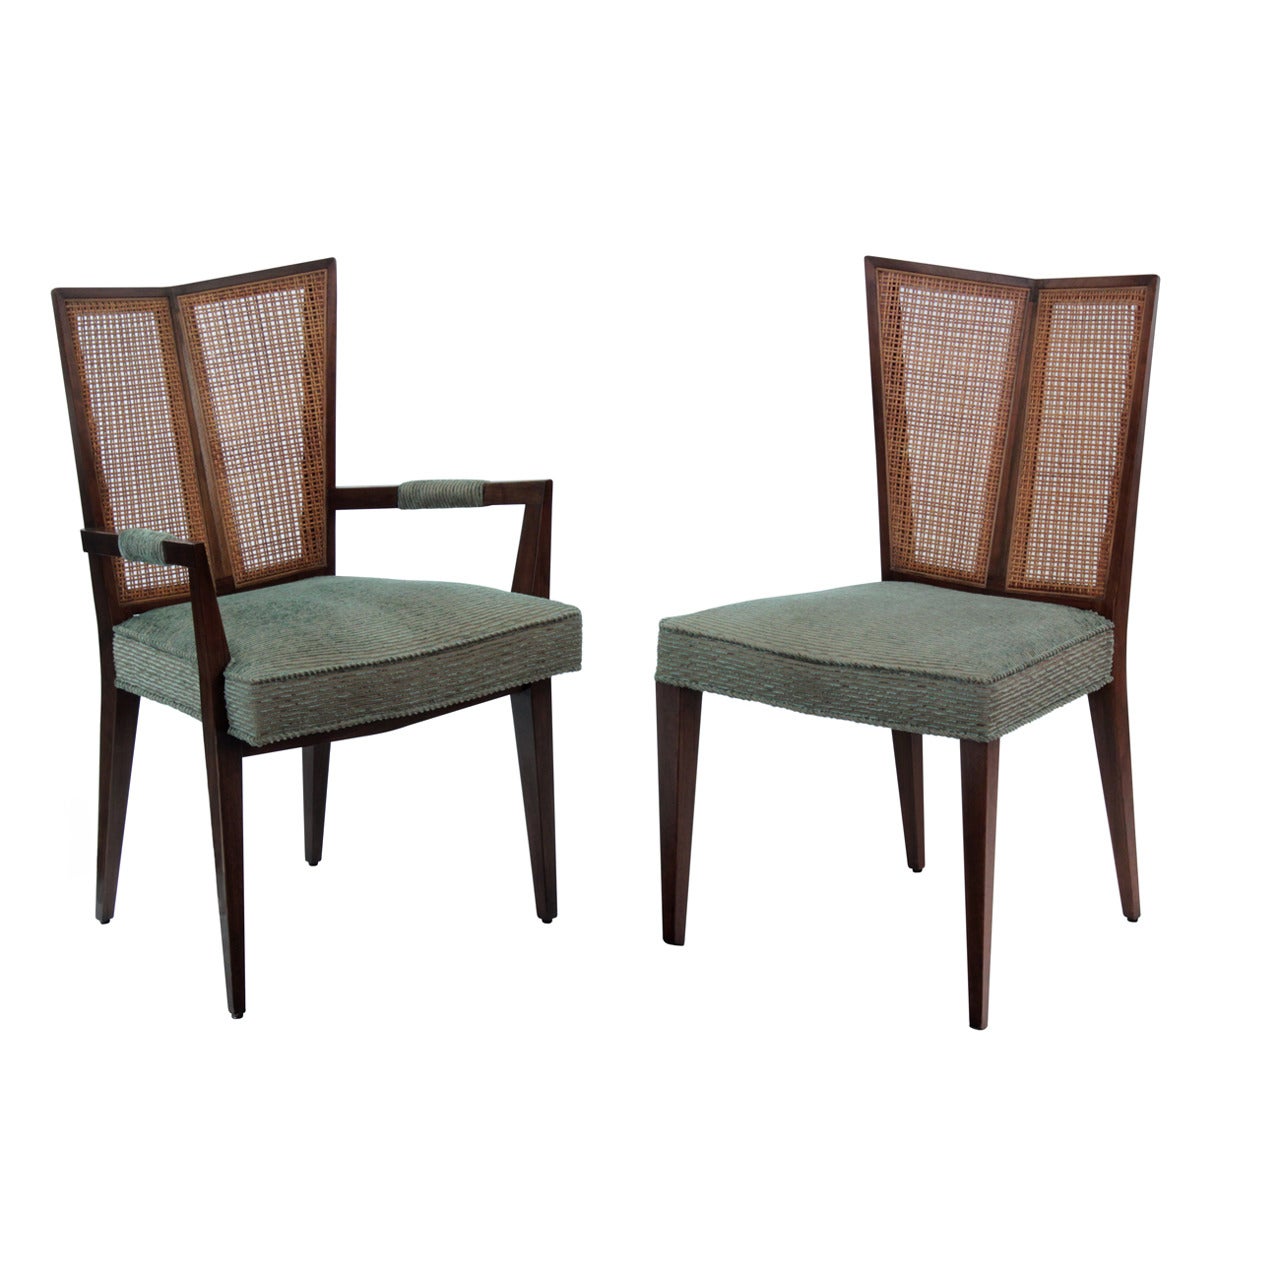 Set of 6 Dining Chairs with Split Indian Cane Backs by Michael Taylor for Baker